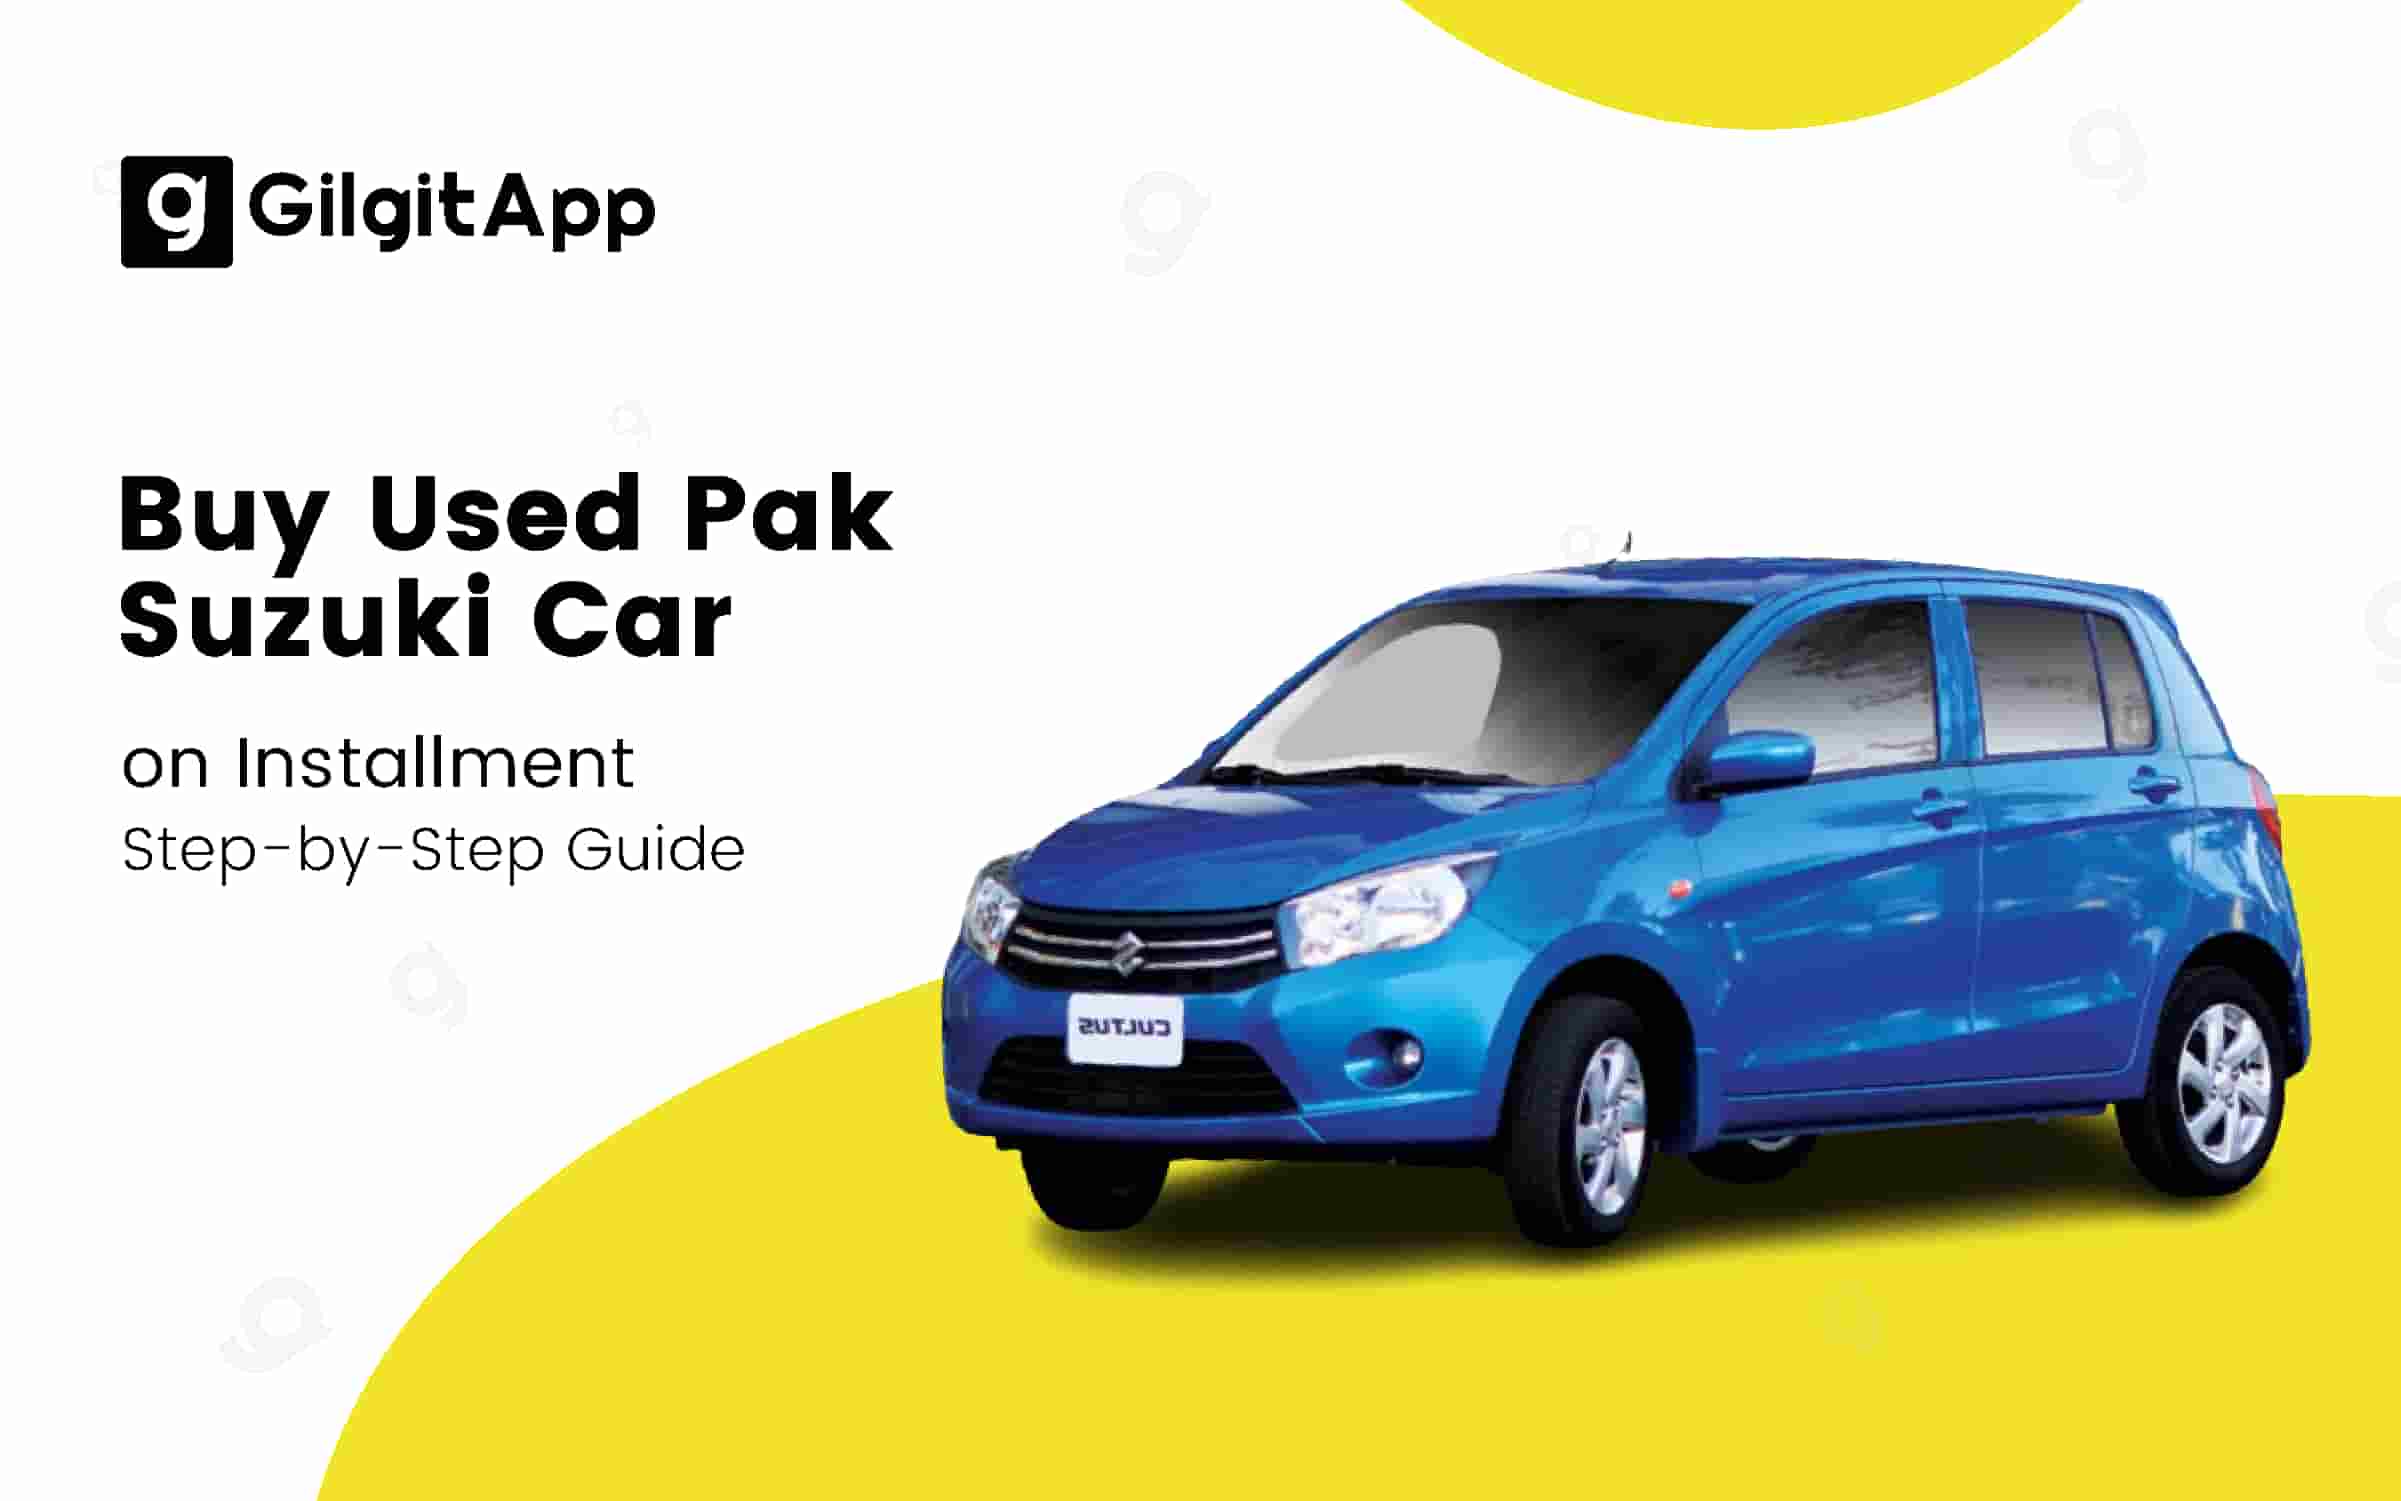 Buy Used Pak Suzuki Car on Installment - Step-by-Step Guide